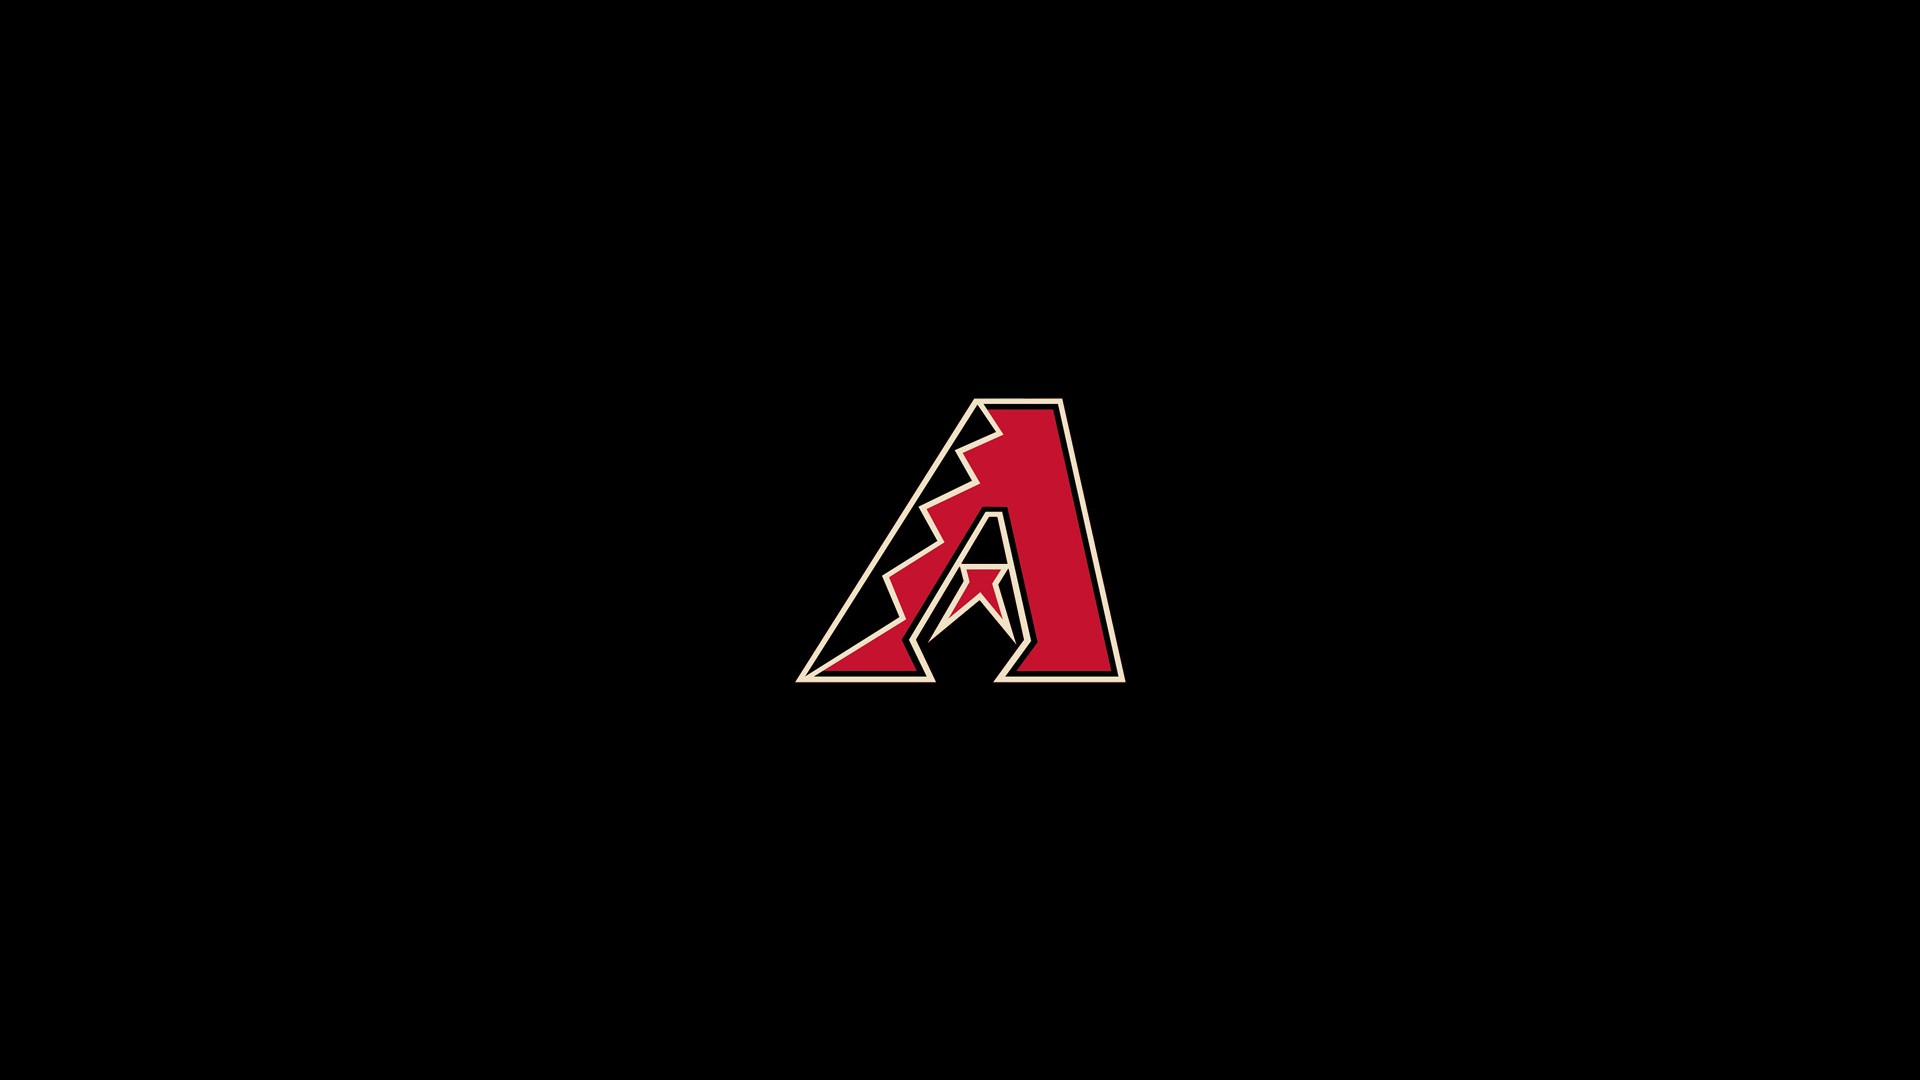 HD Backgrounds Arizona Diamondbacks with high-resolution 1920x1080 pixel. You can use this wallpaper for Mac Desktop Wallpaper, Laptop Screensavers, Android Wallpapers, Tablet or iPhone Home Screen and another mobile phone device